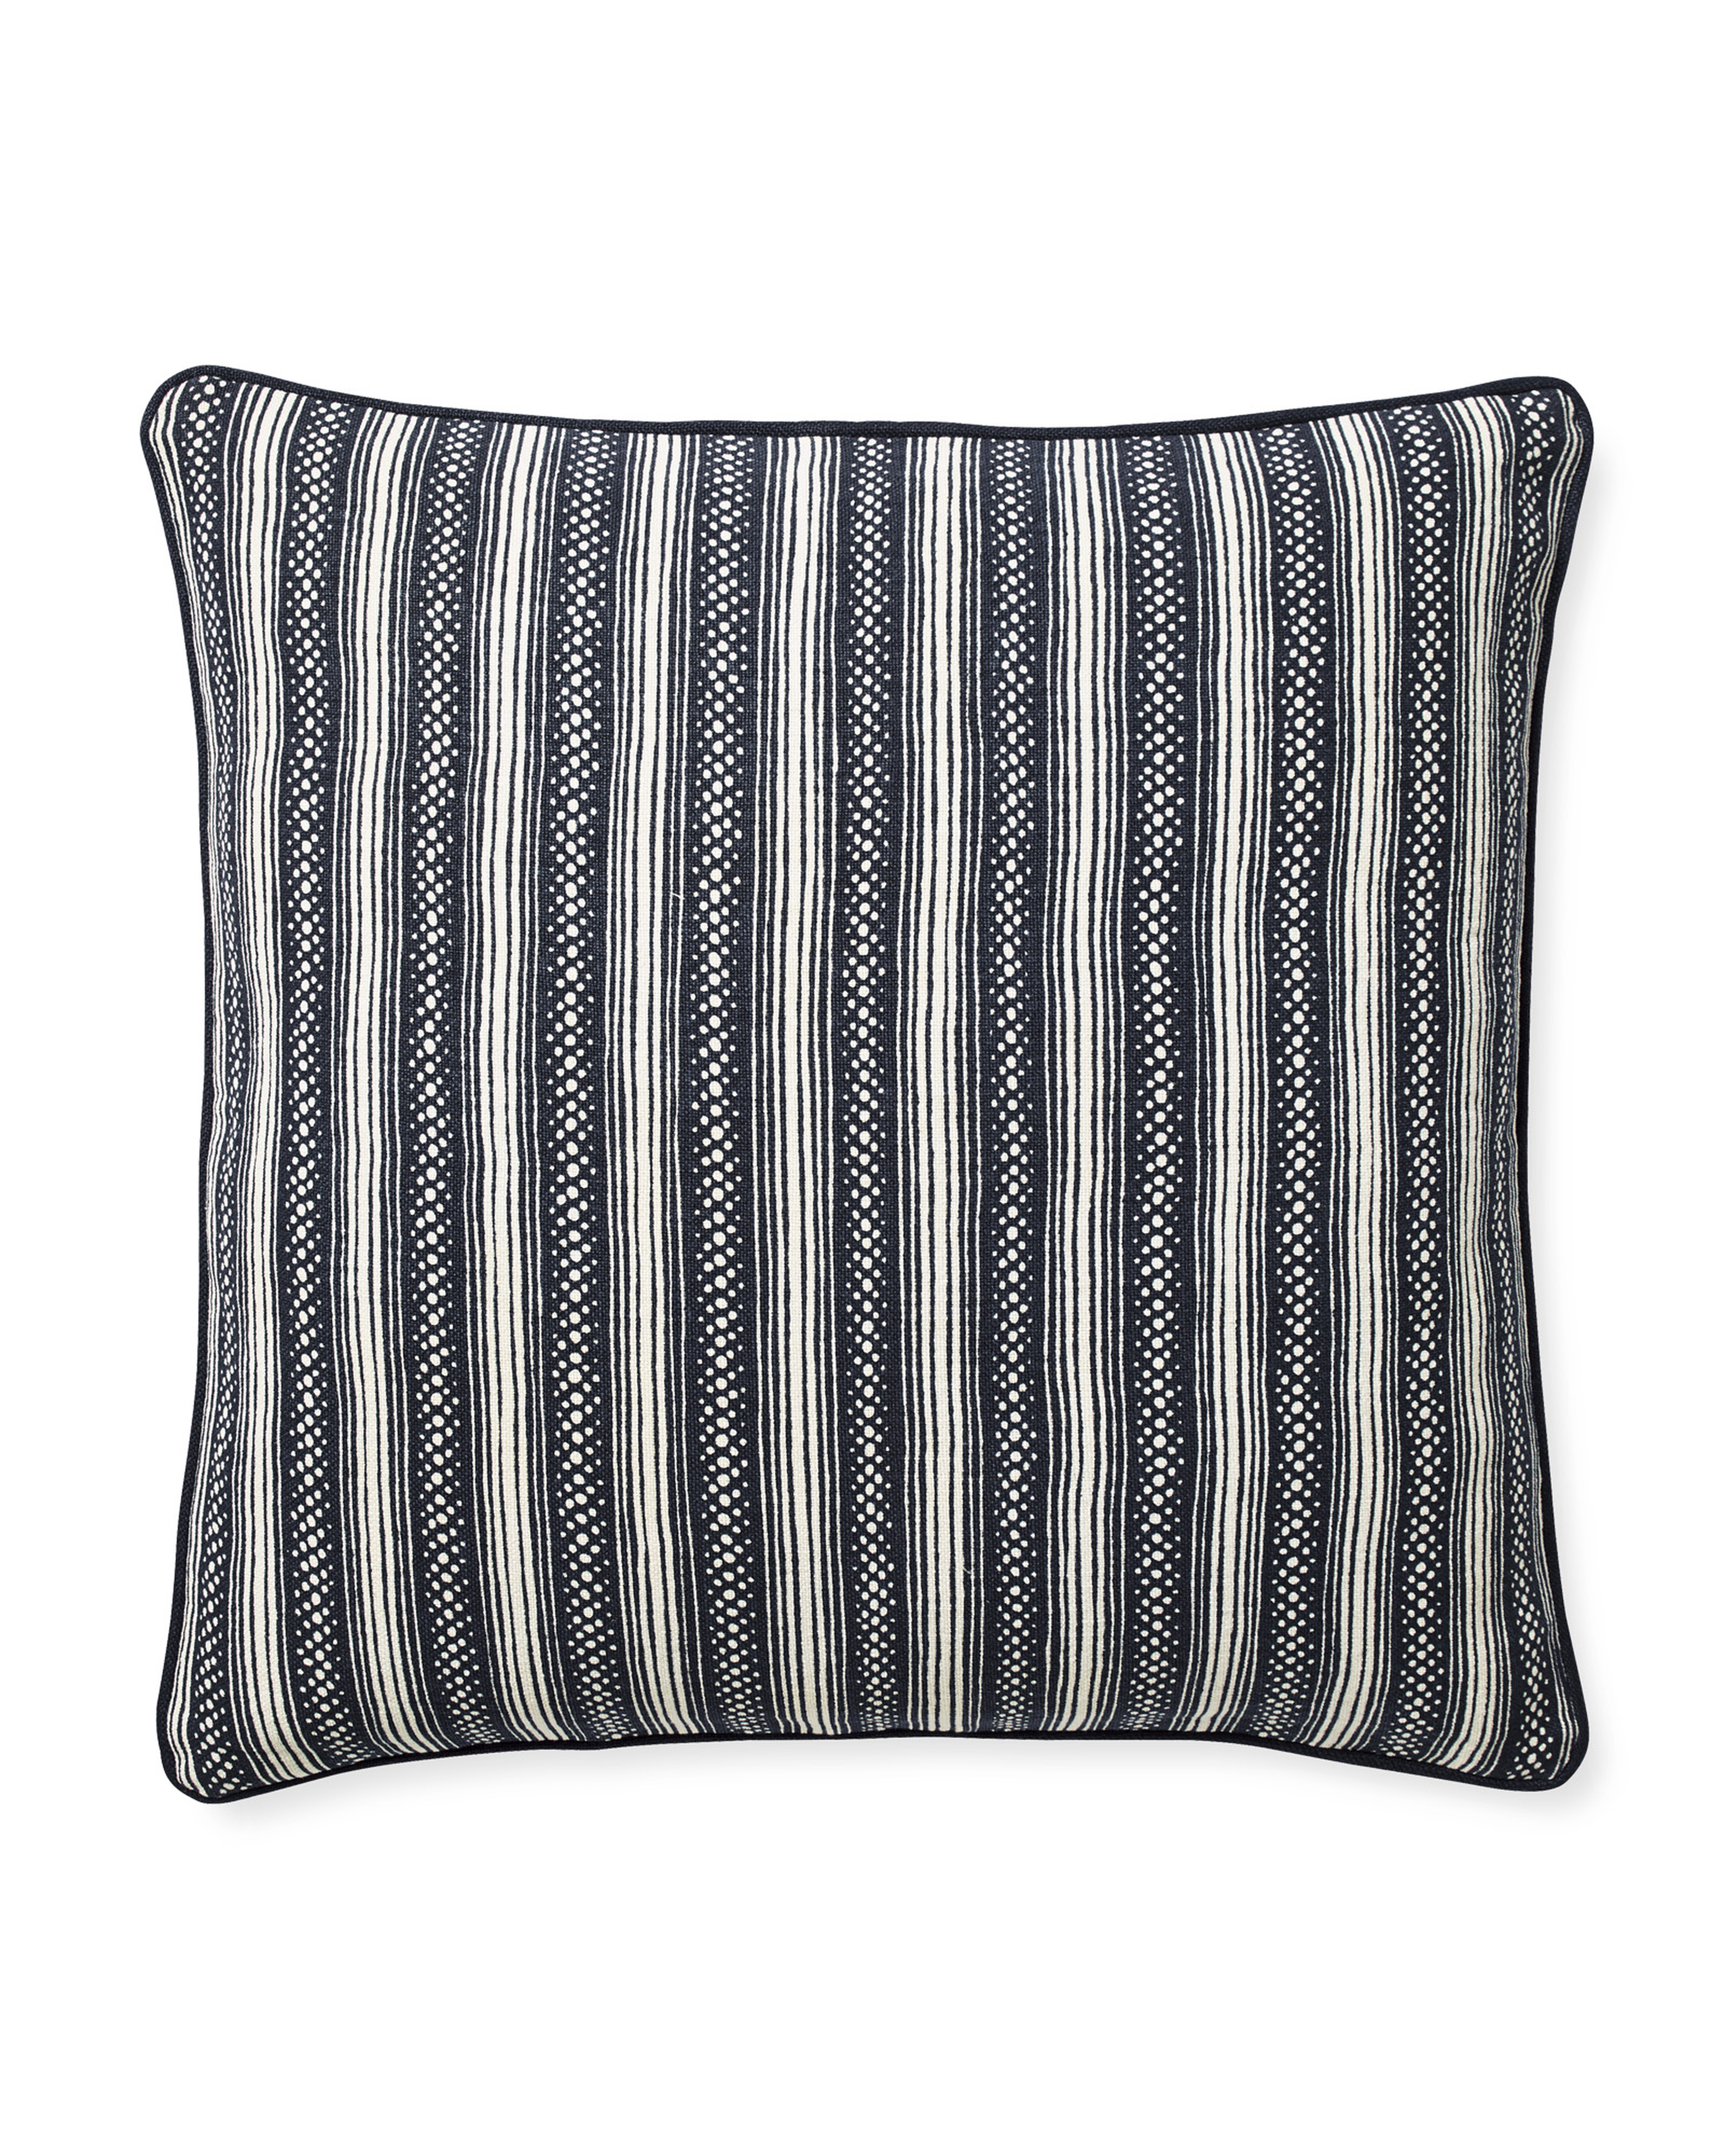 Stowe Pillow Cover- Navy - Serena and Lily